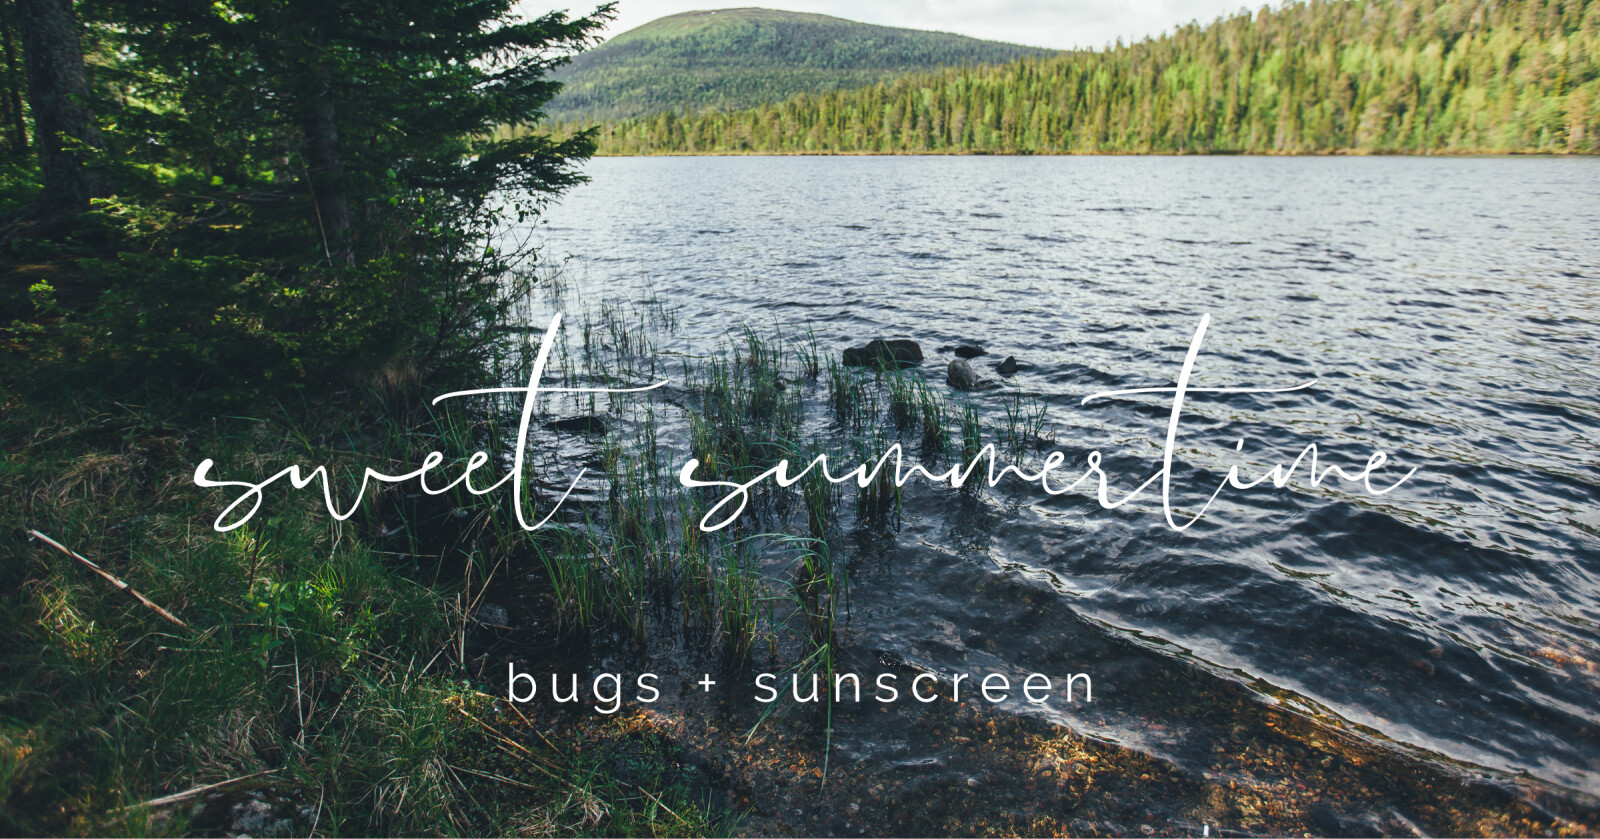 Sunscreen, SPF, and Bugs... OH MY!